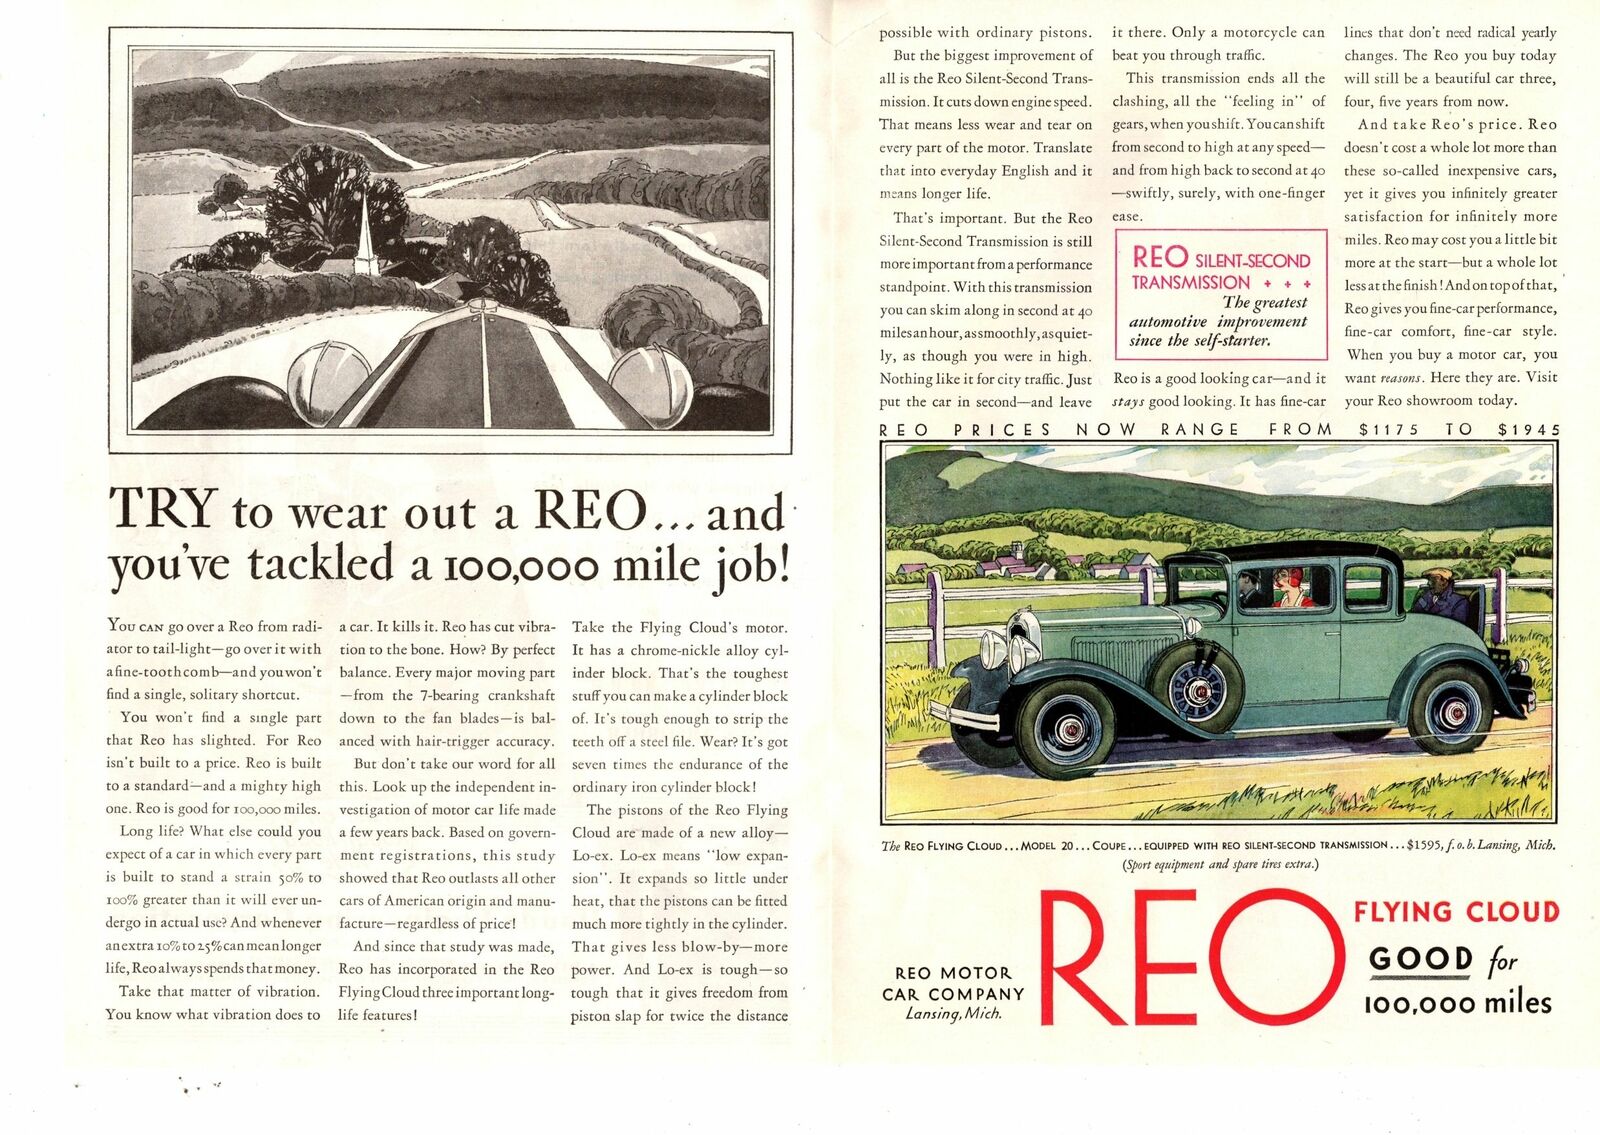 1930 Reo Flying Cloud Model 20 Car $1595 Lansing Michigan Color 2-Page Print Ad